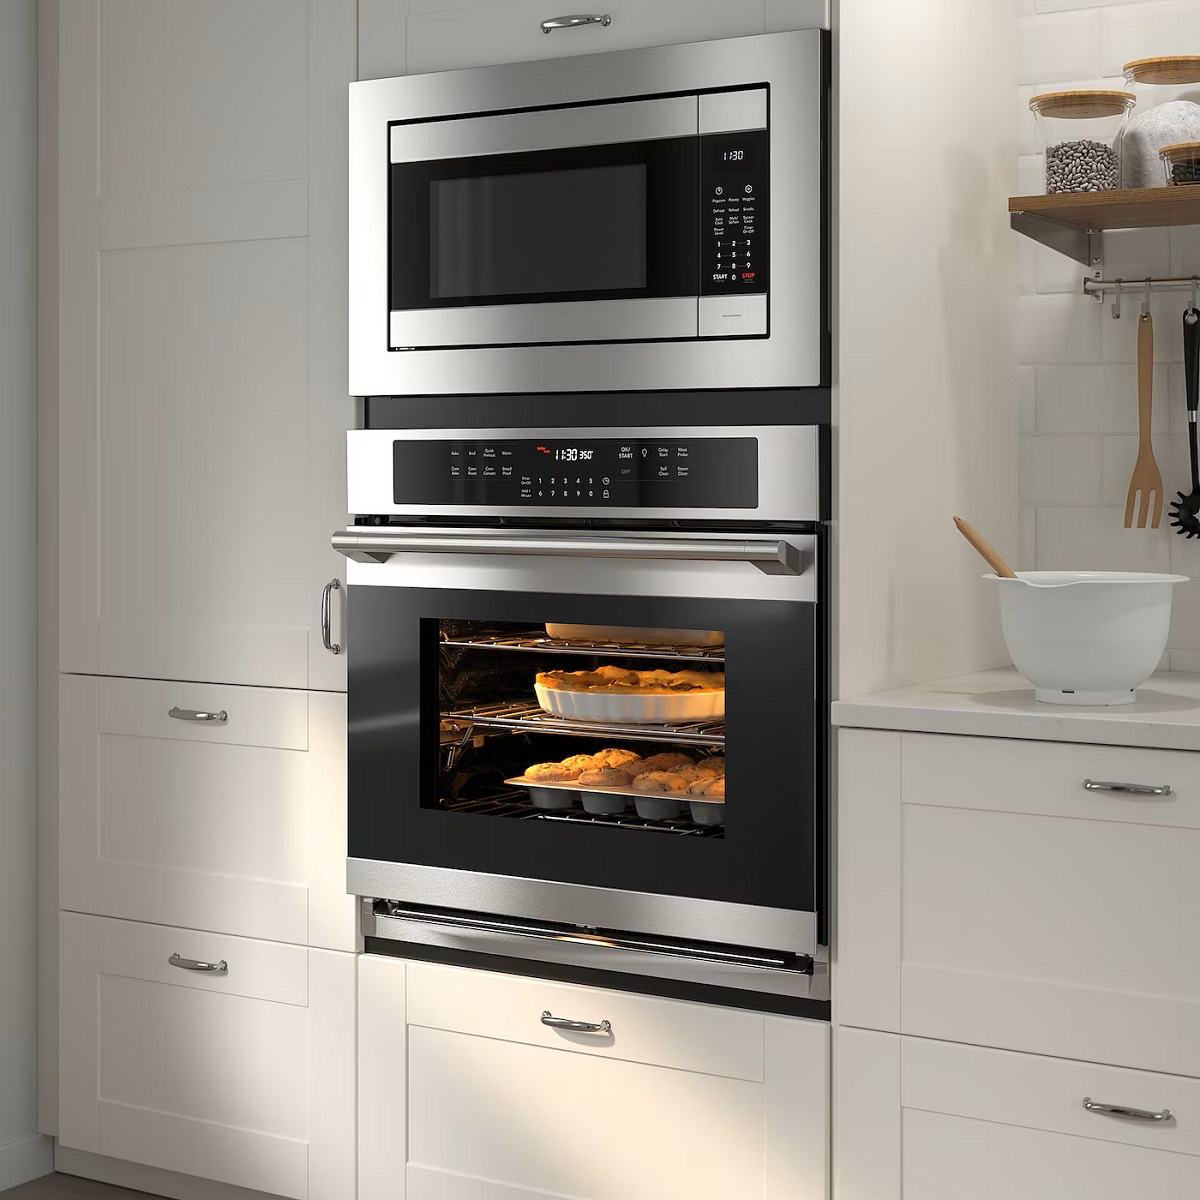 10 Best Wall Ovens With Built-In Micro Wave for 2023